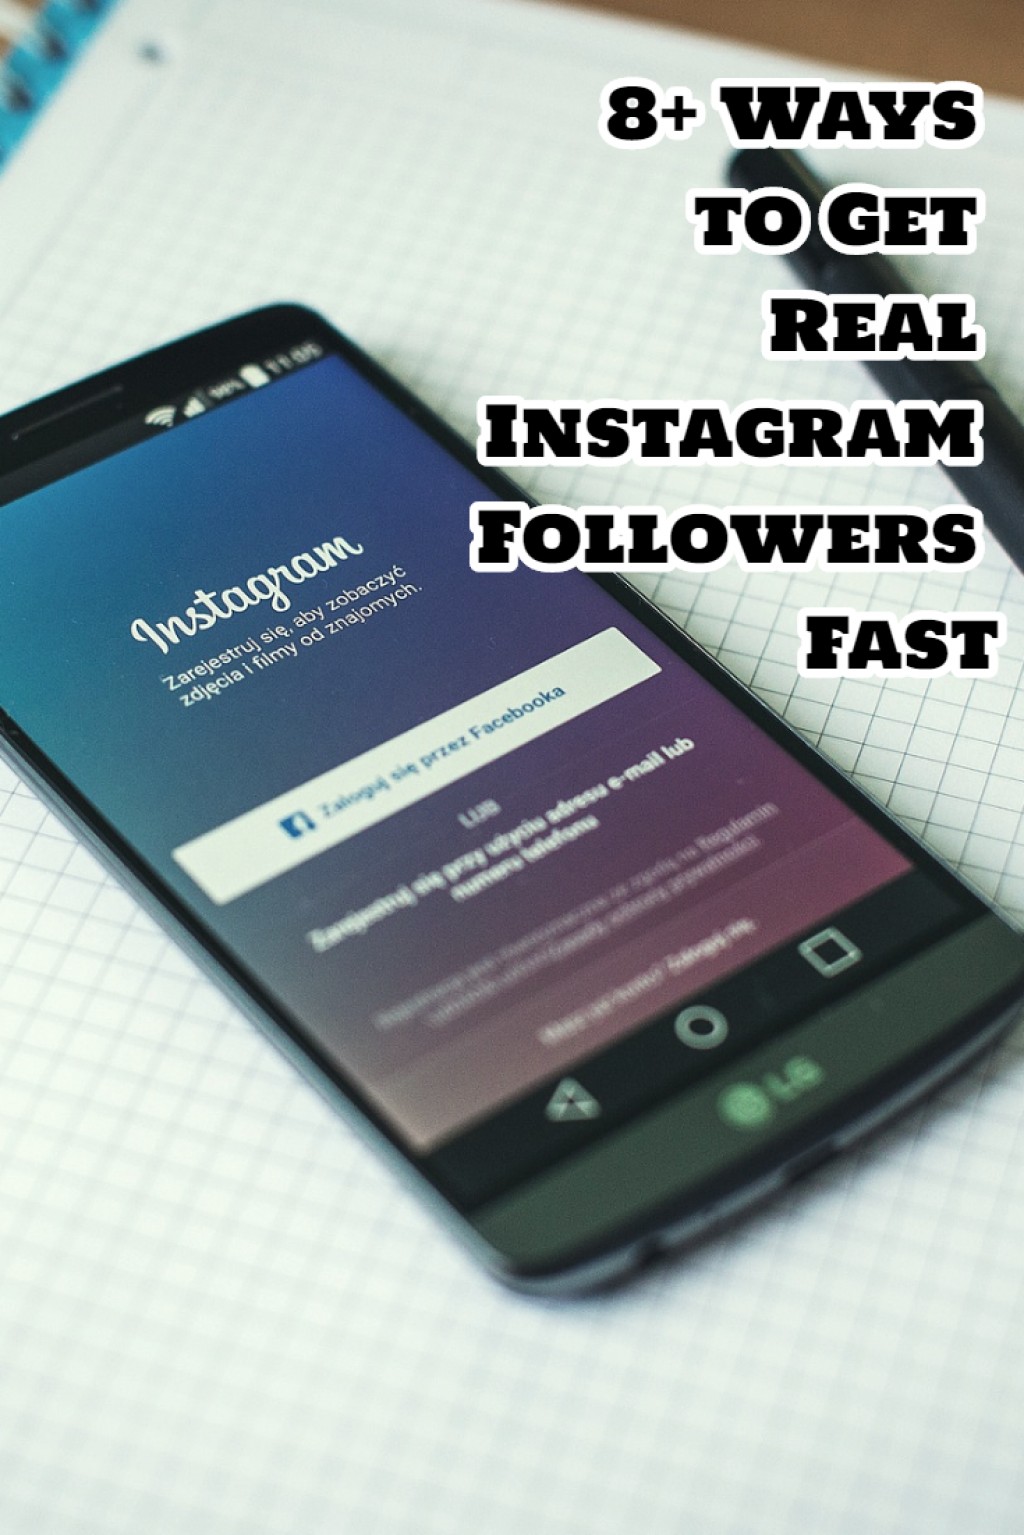  - how to get really fast followers on instagram